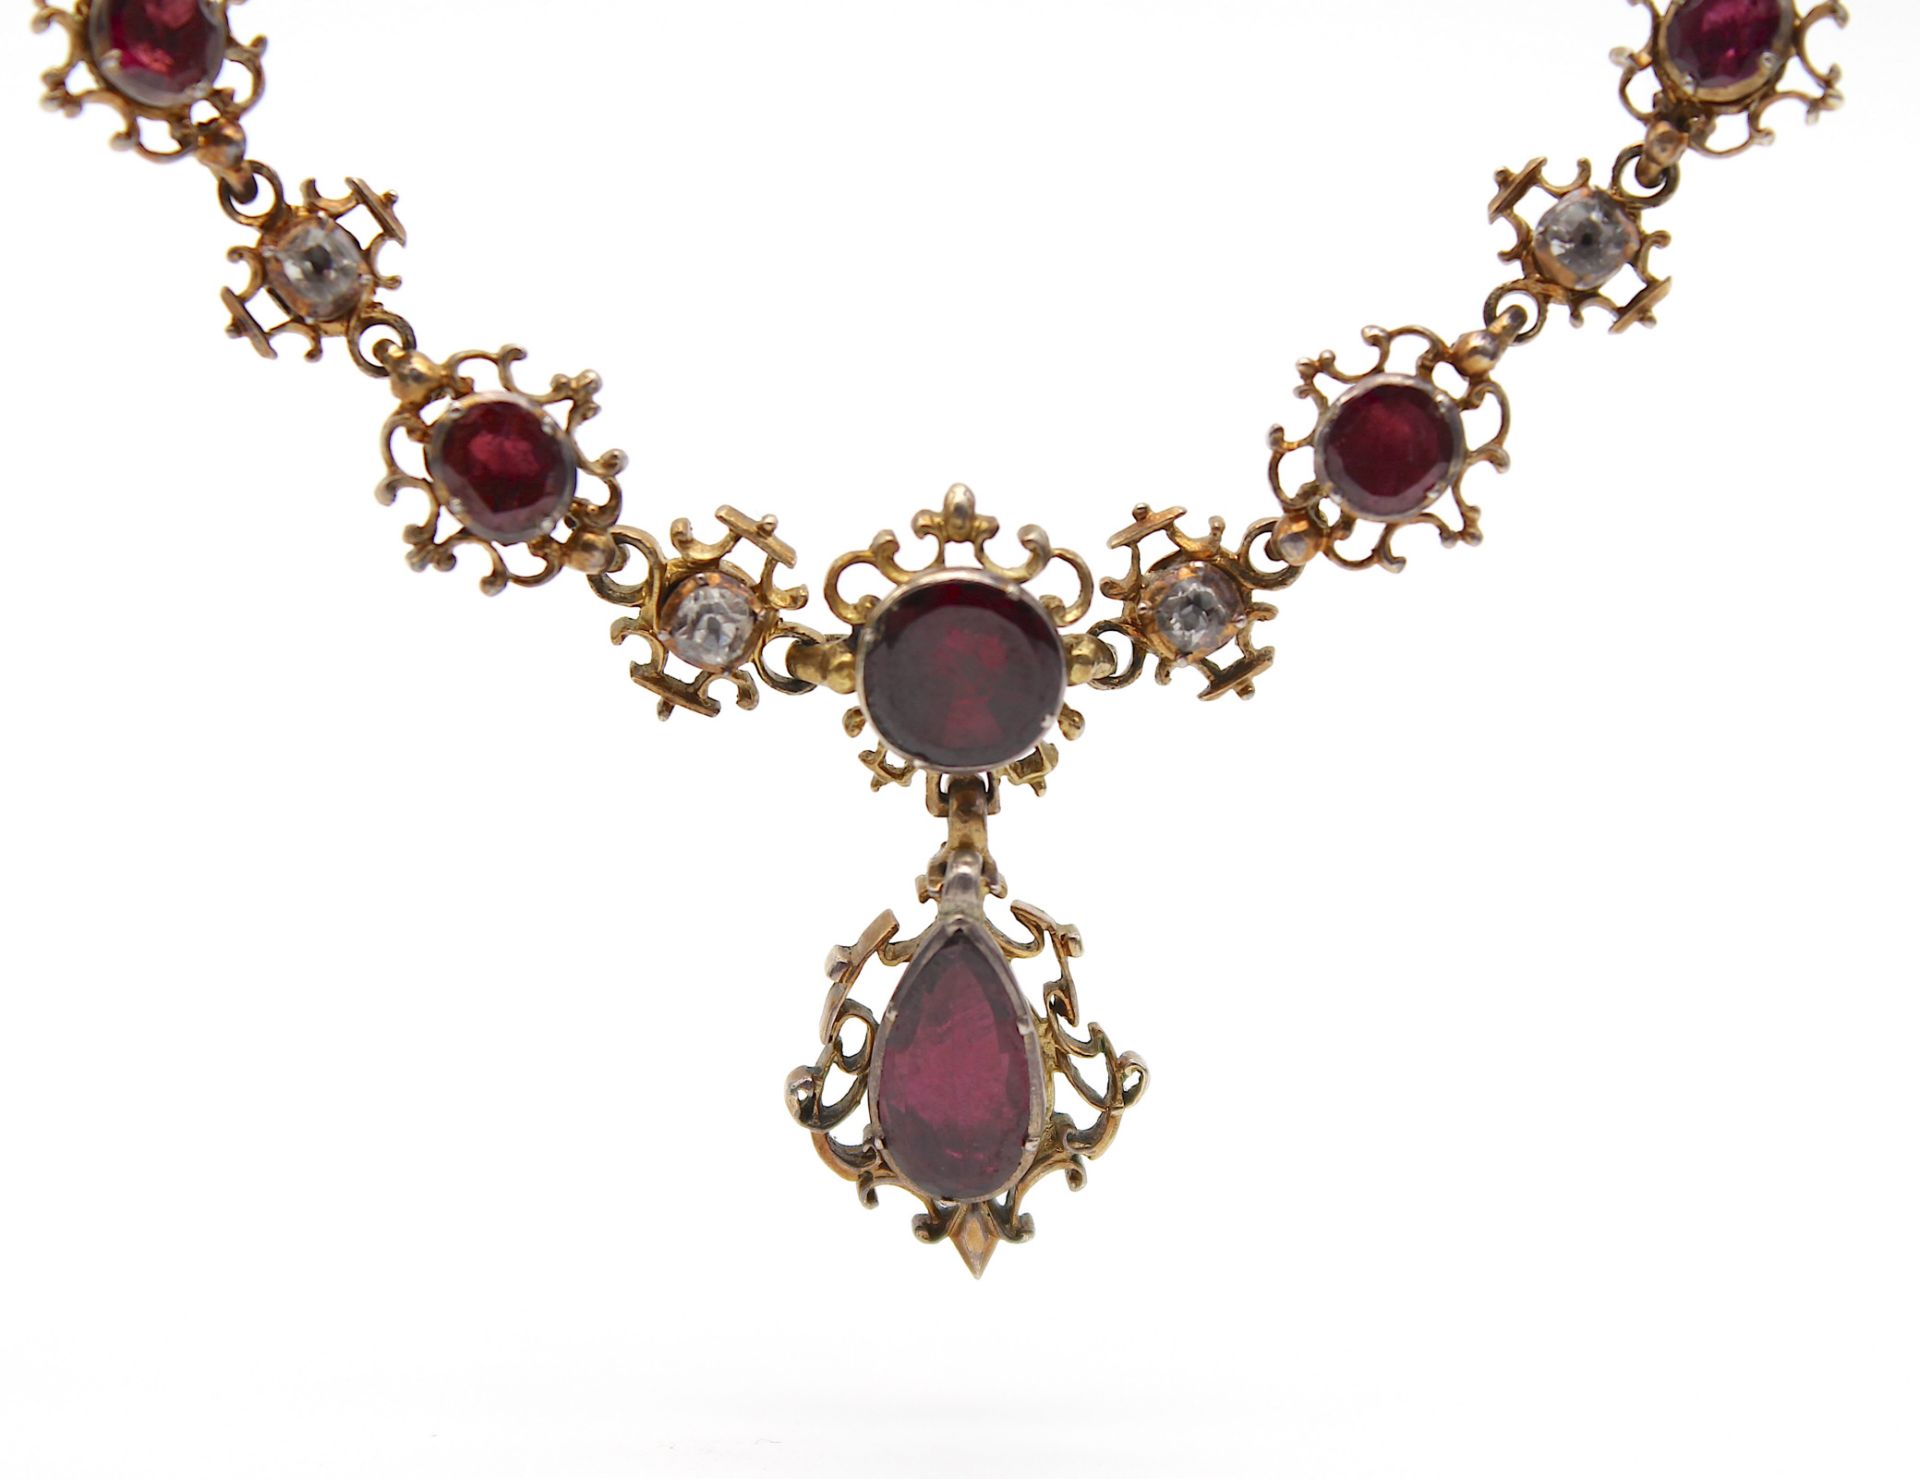 Charming antique necklace with garnet and rock crystal - Image 2 of 5